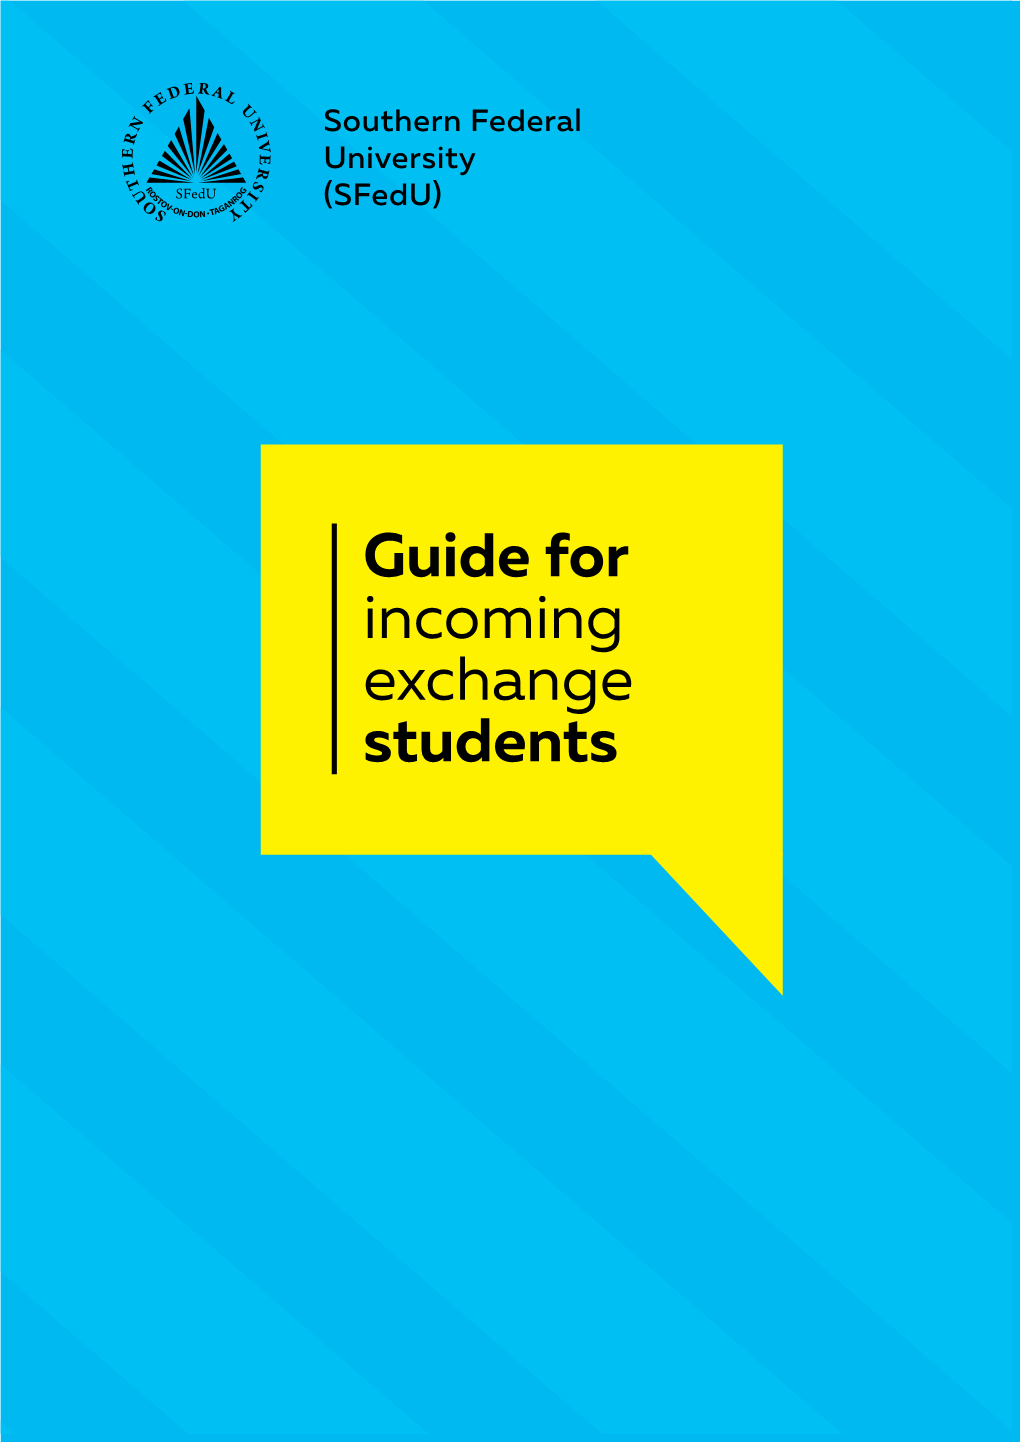 Guide for Incoming Exchange Students Contents